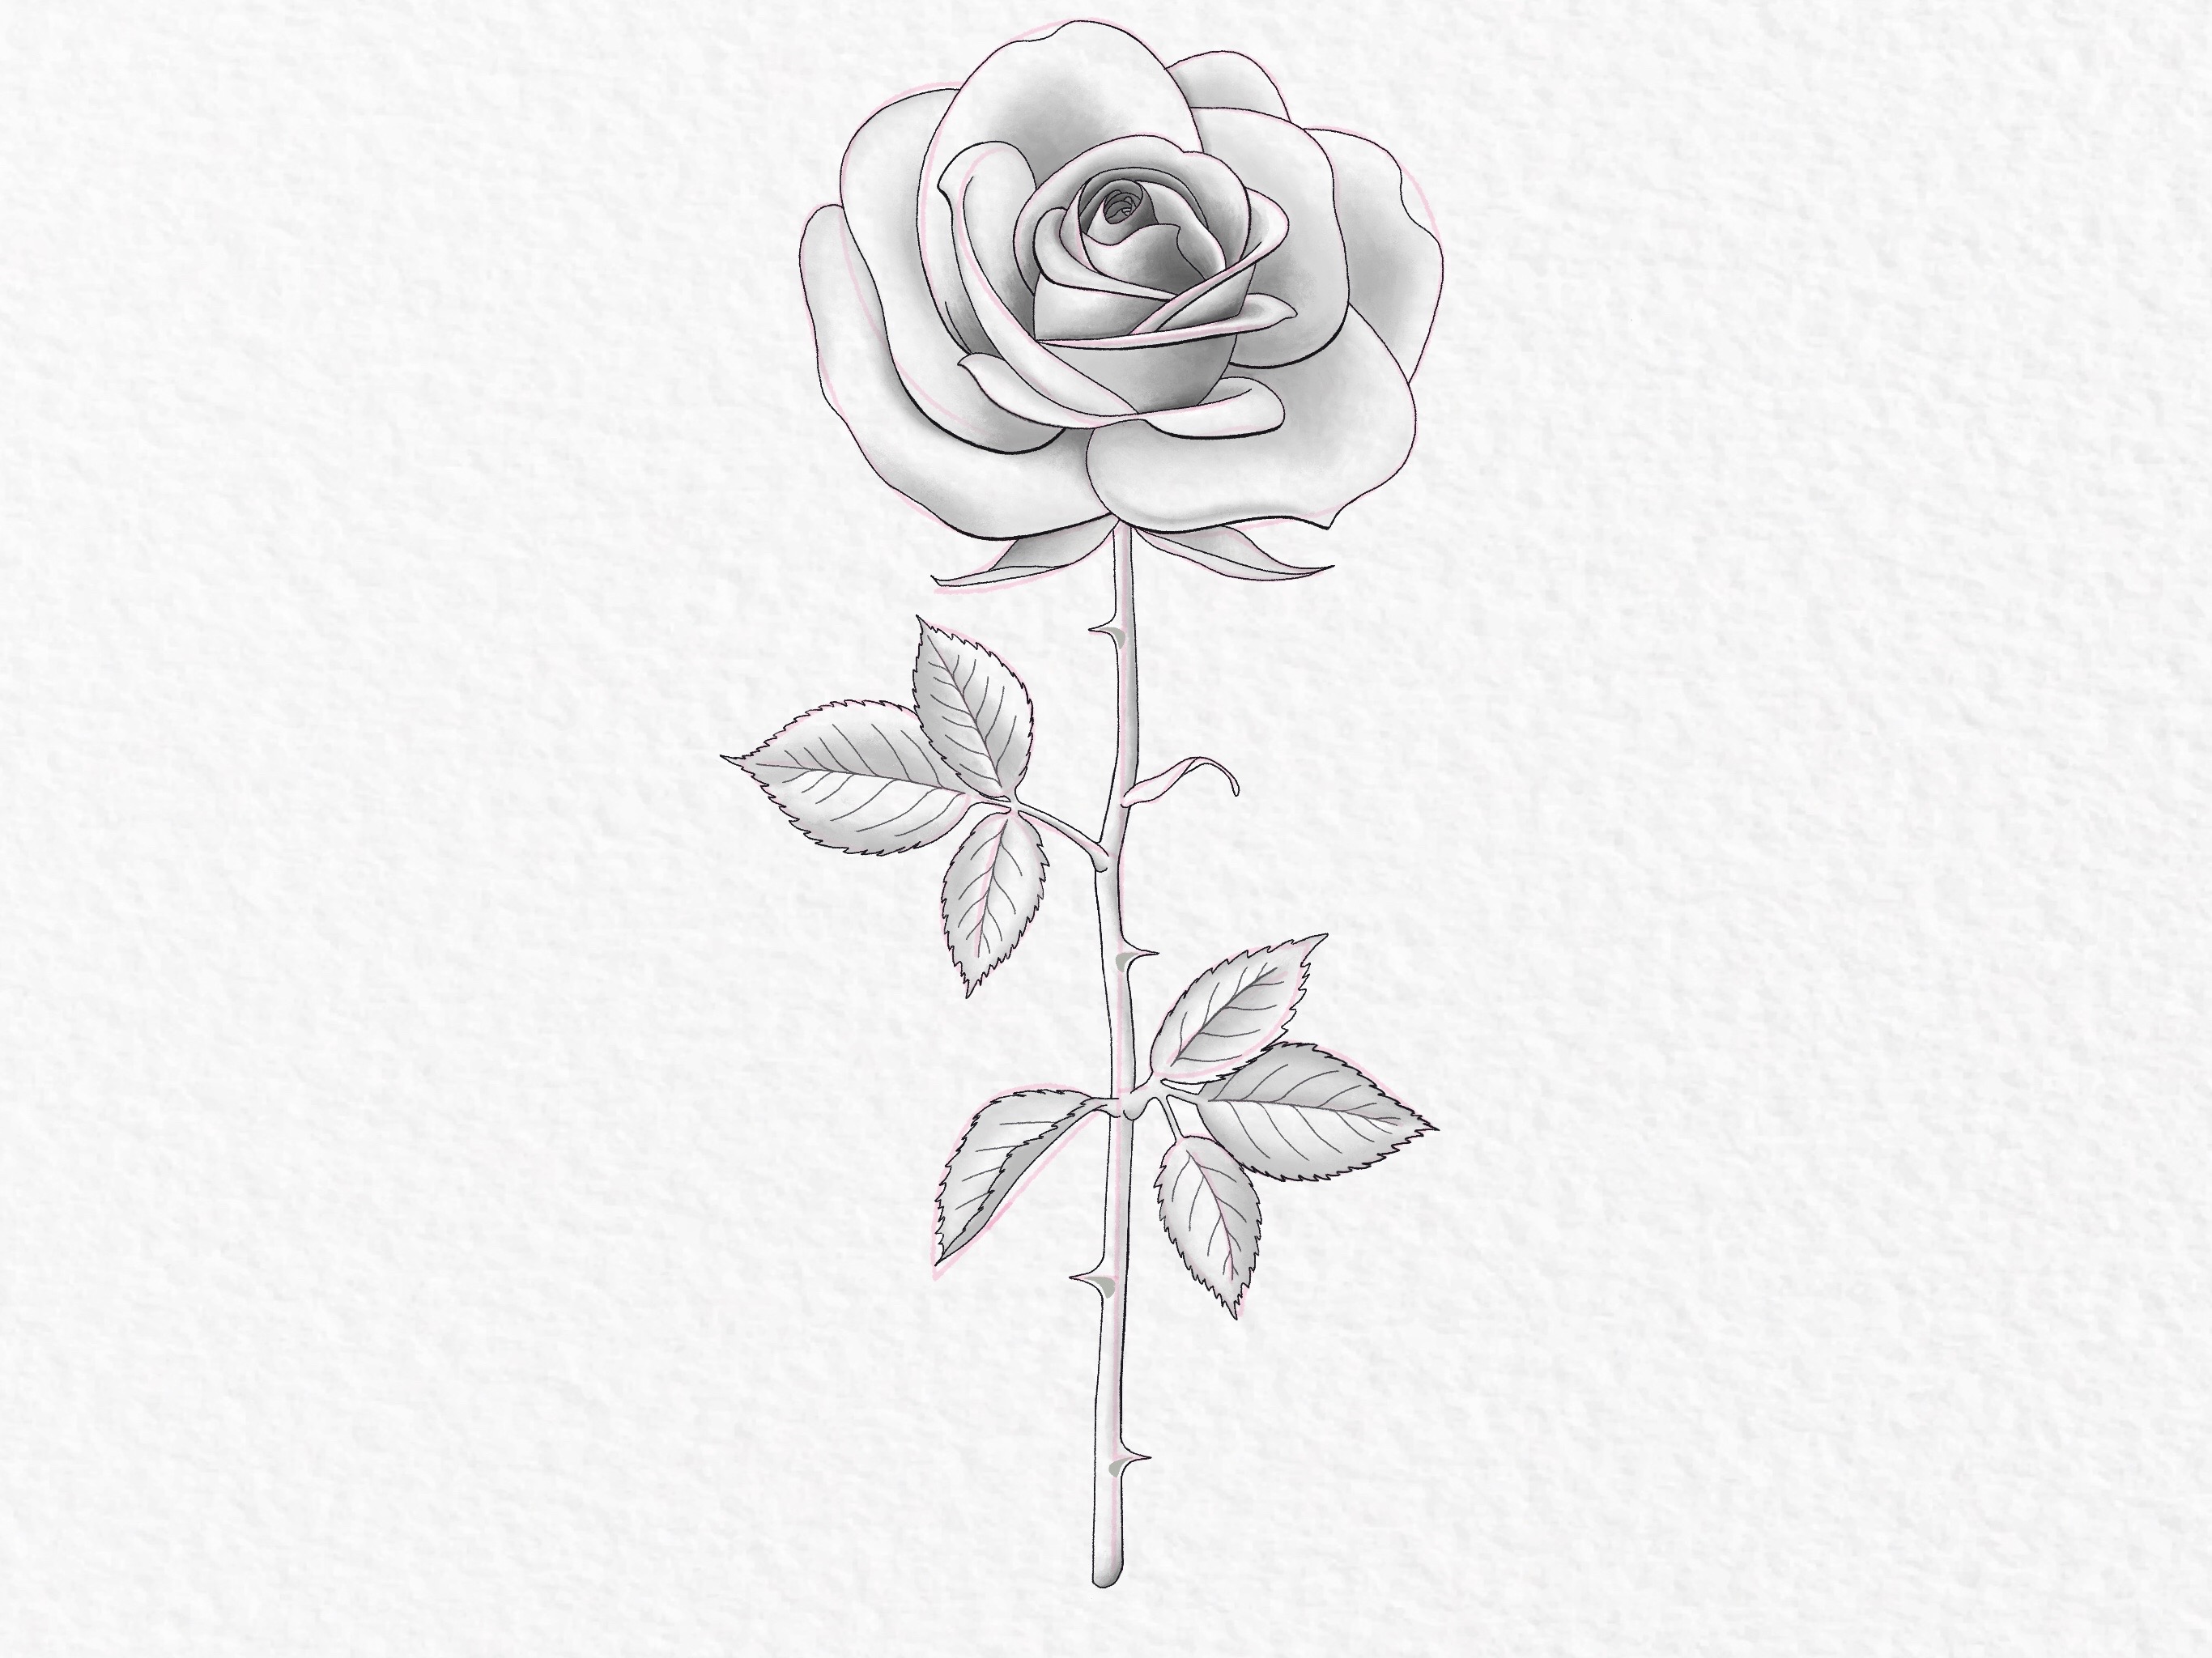 How to draw a rose step by step drawing tutorial step 49 2ef763c